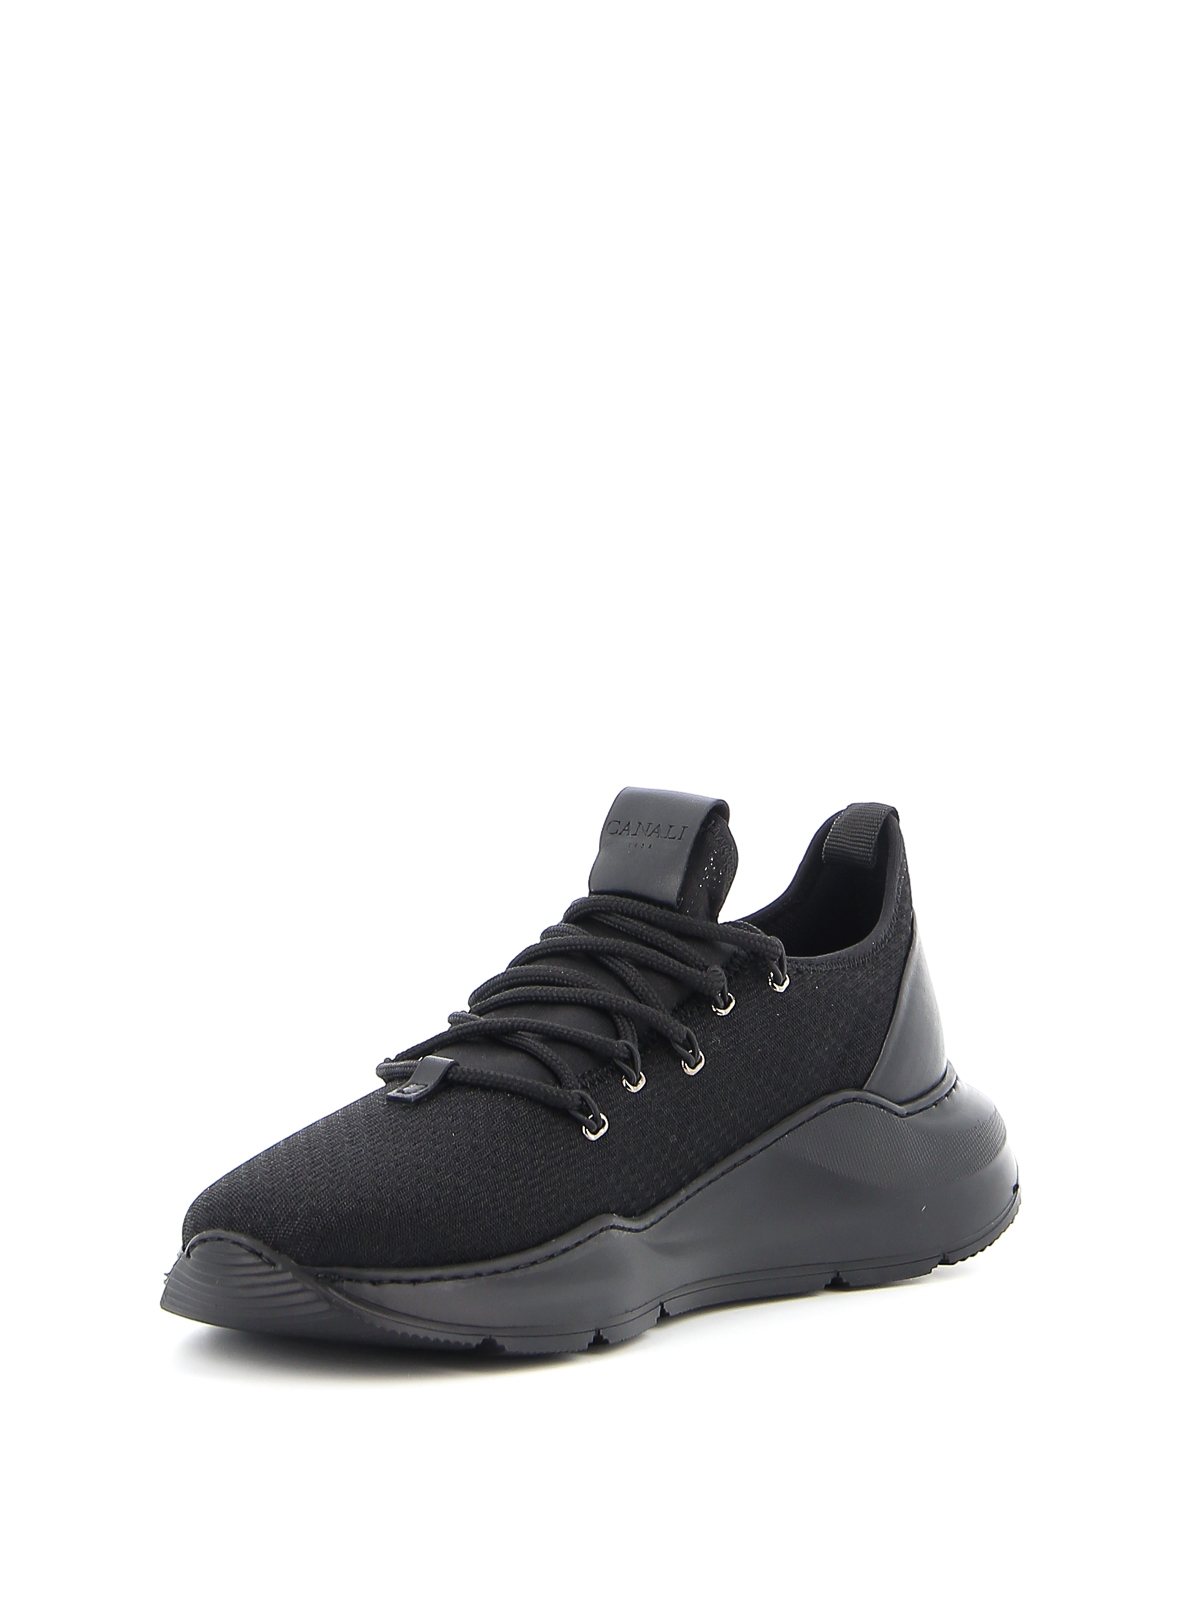 Trainers Canali - Black Edition sneakers - RY00453110191207 | iKRIX.com